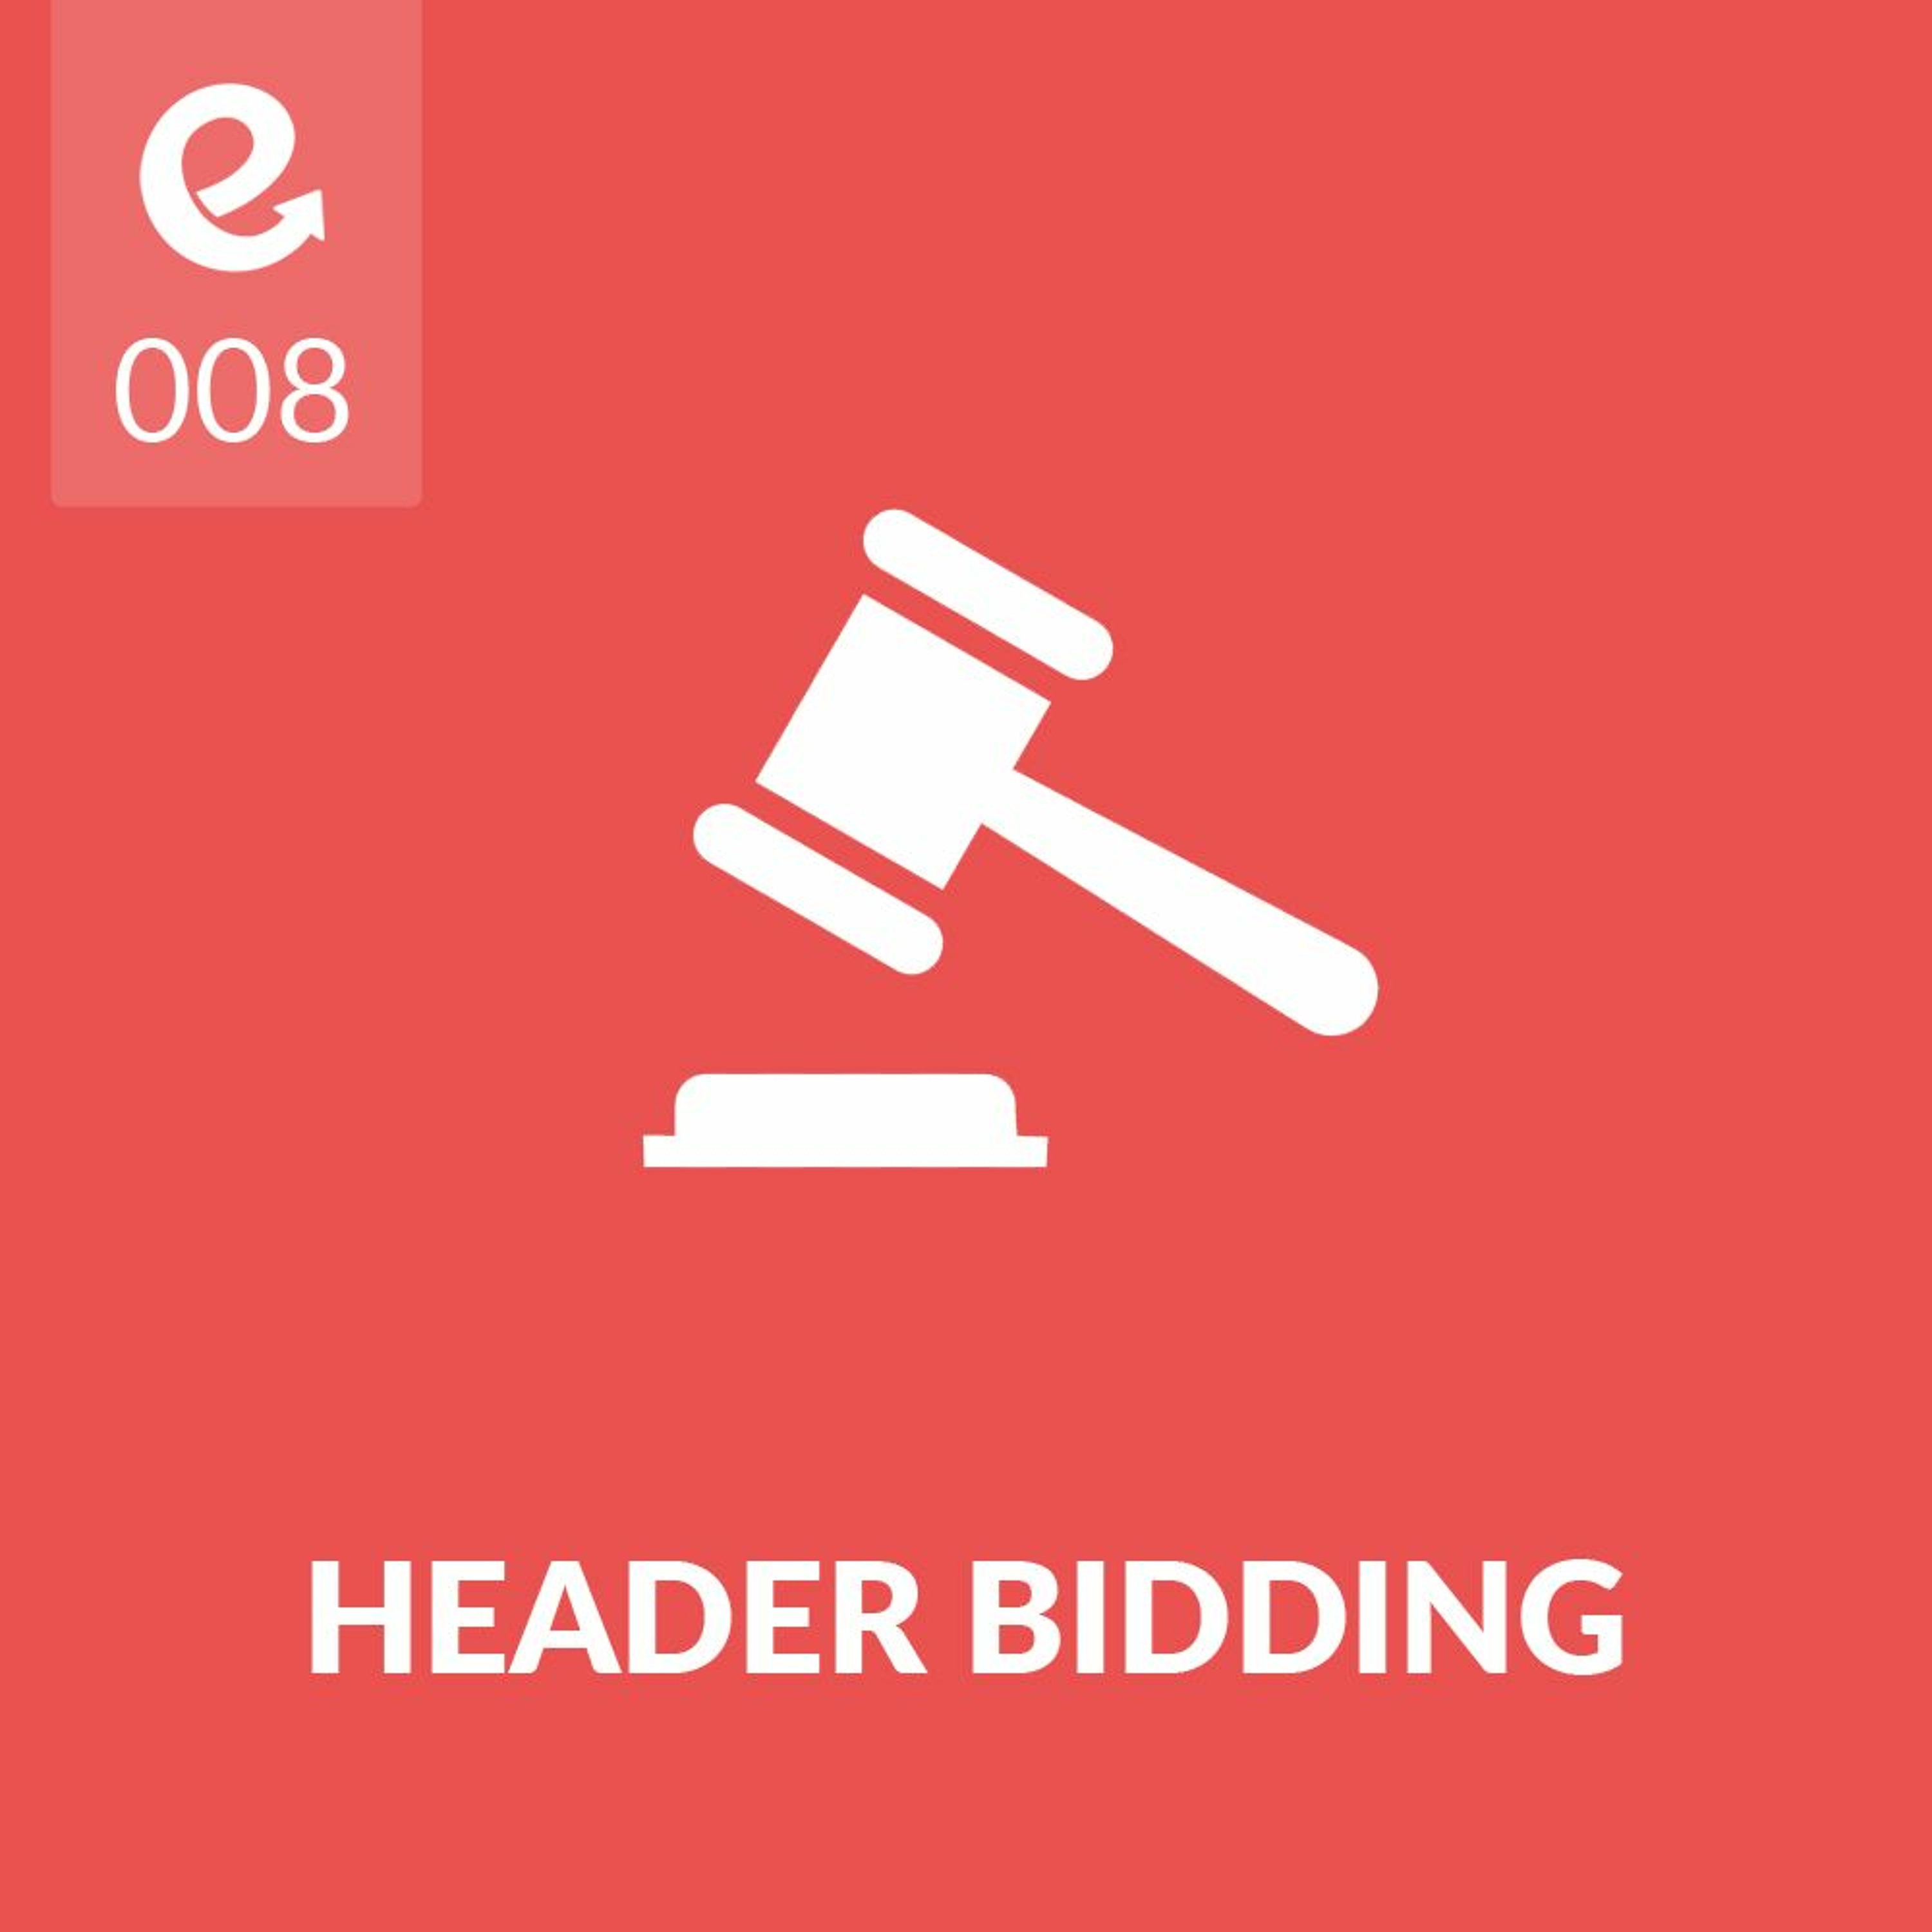 08: Is Header Bidding Replacing The Waterfall?